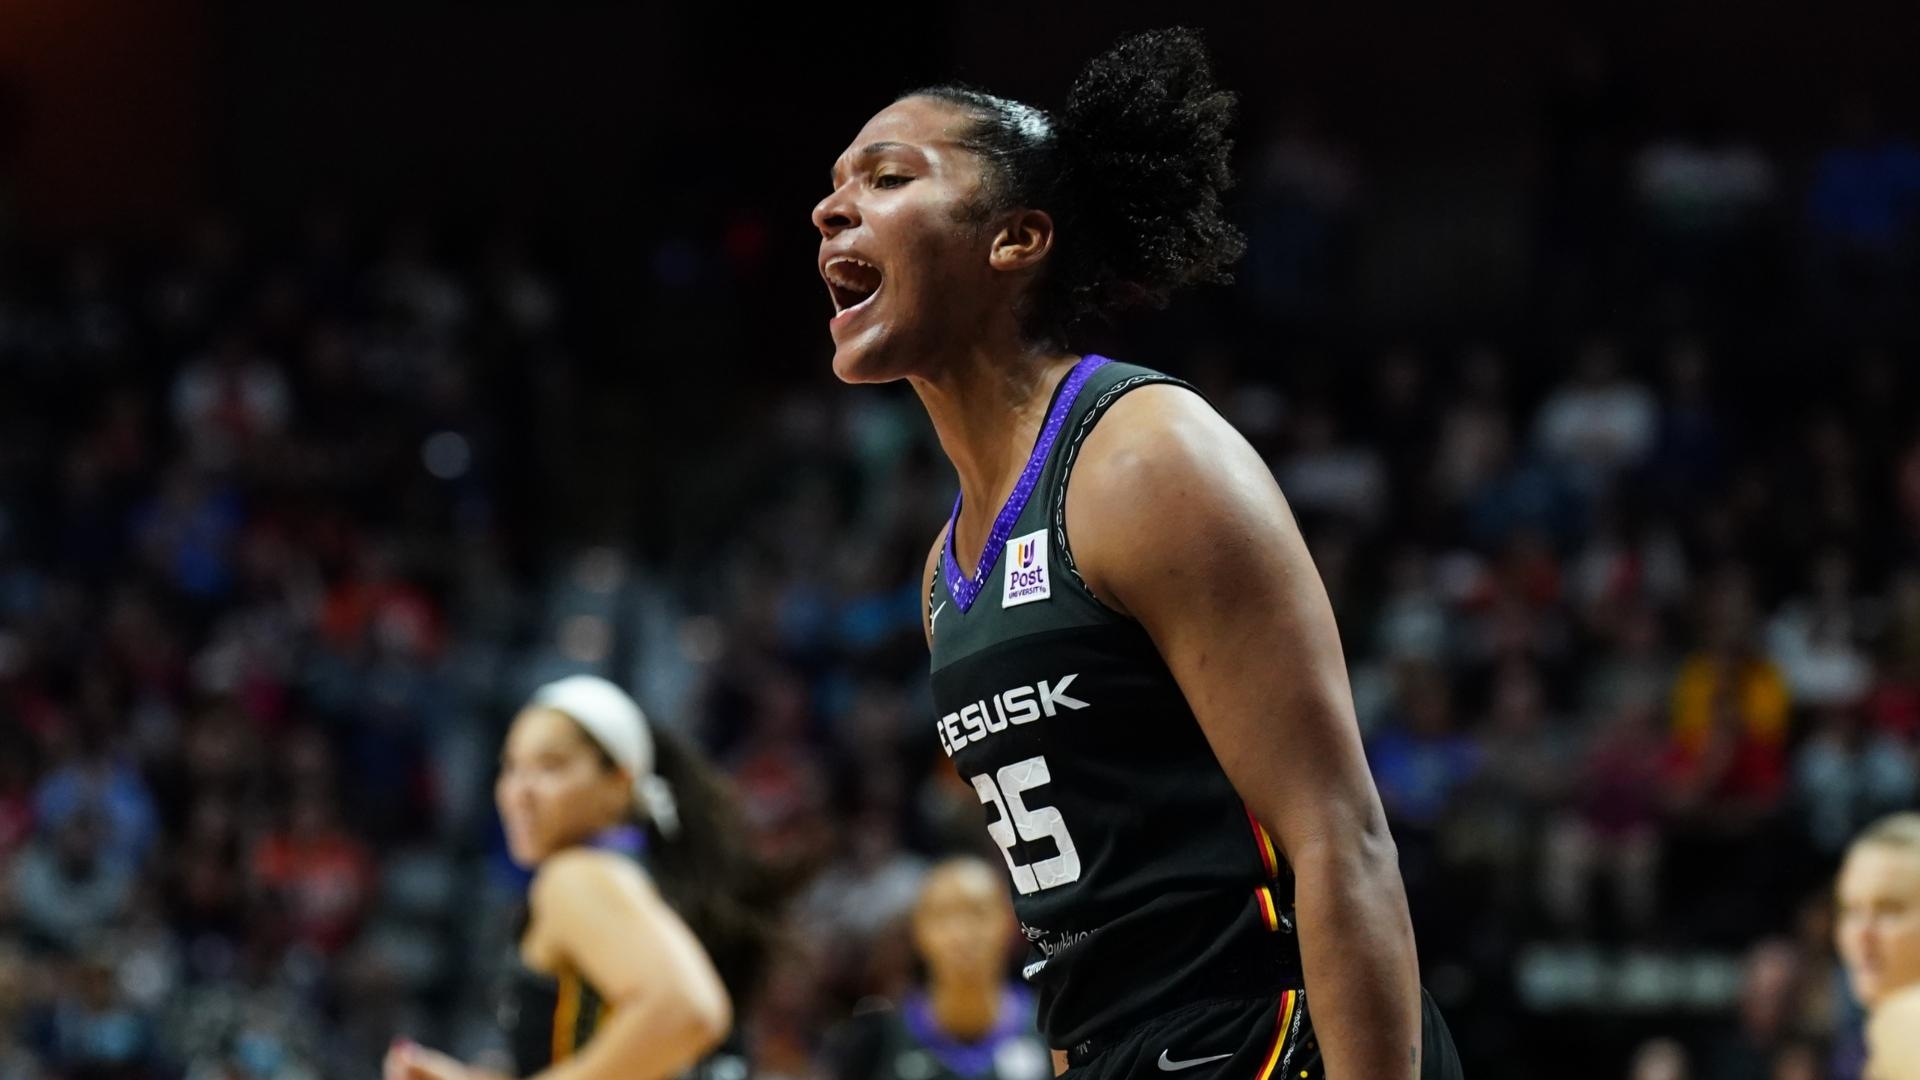 Alyssa Thomas becomes 2nd WNBA player to record triple-double in season debut